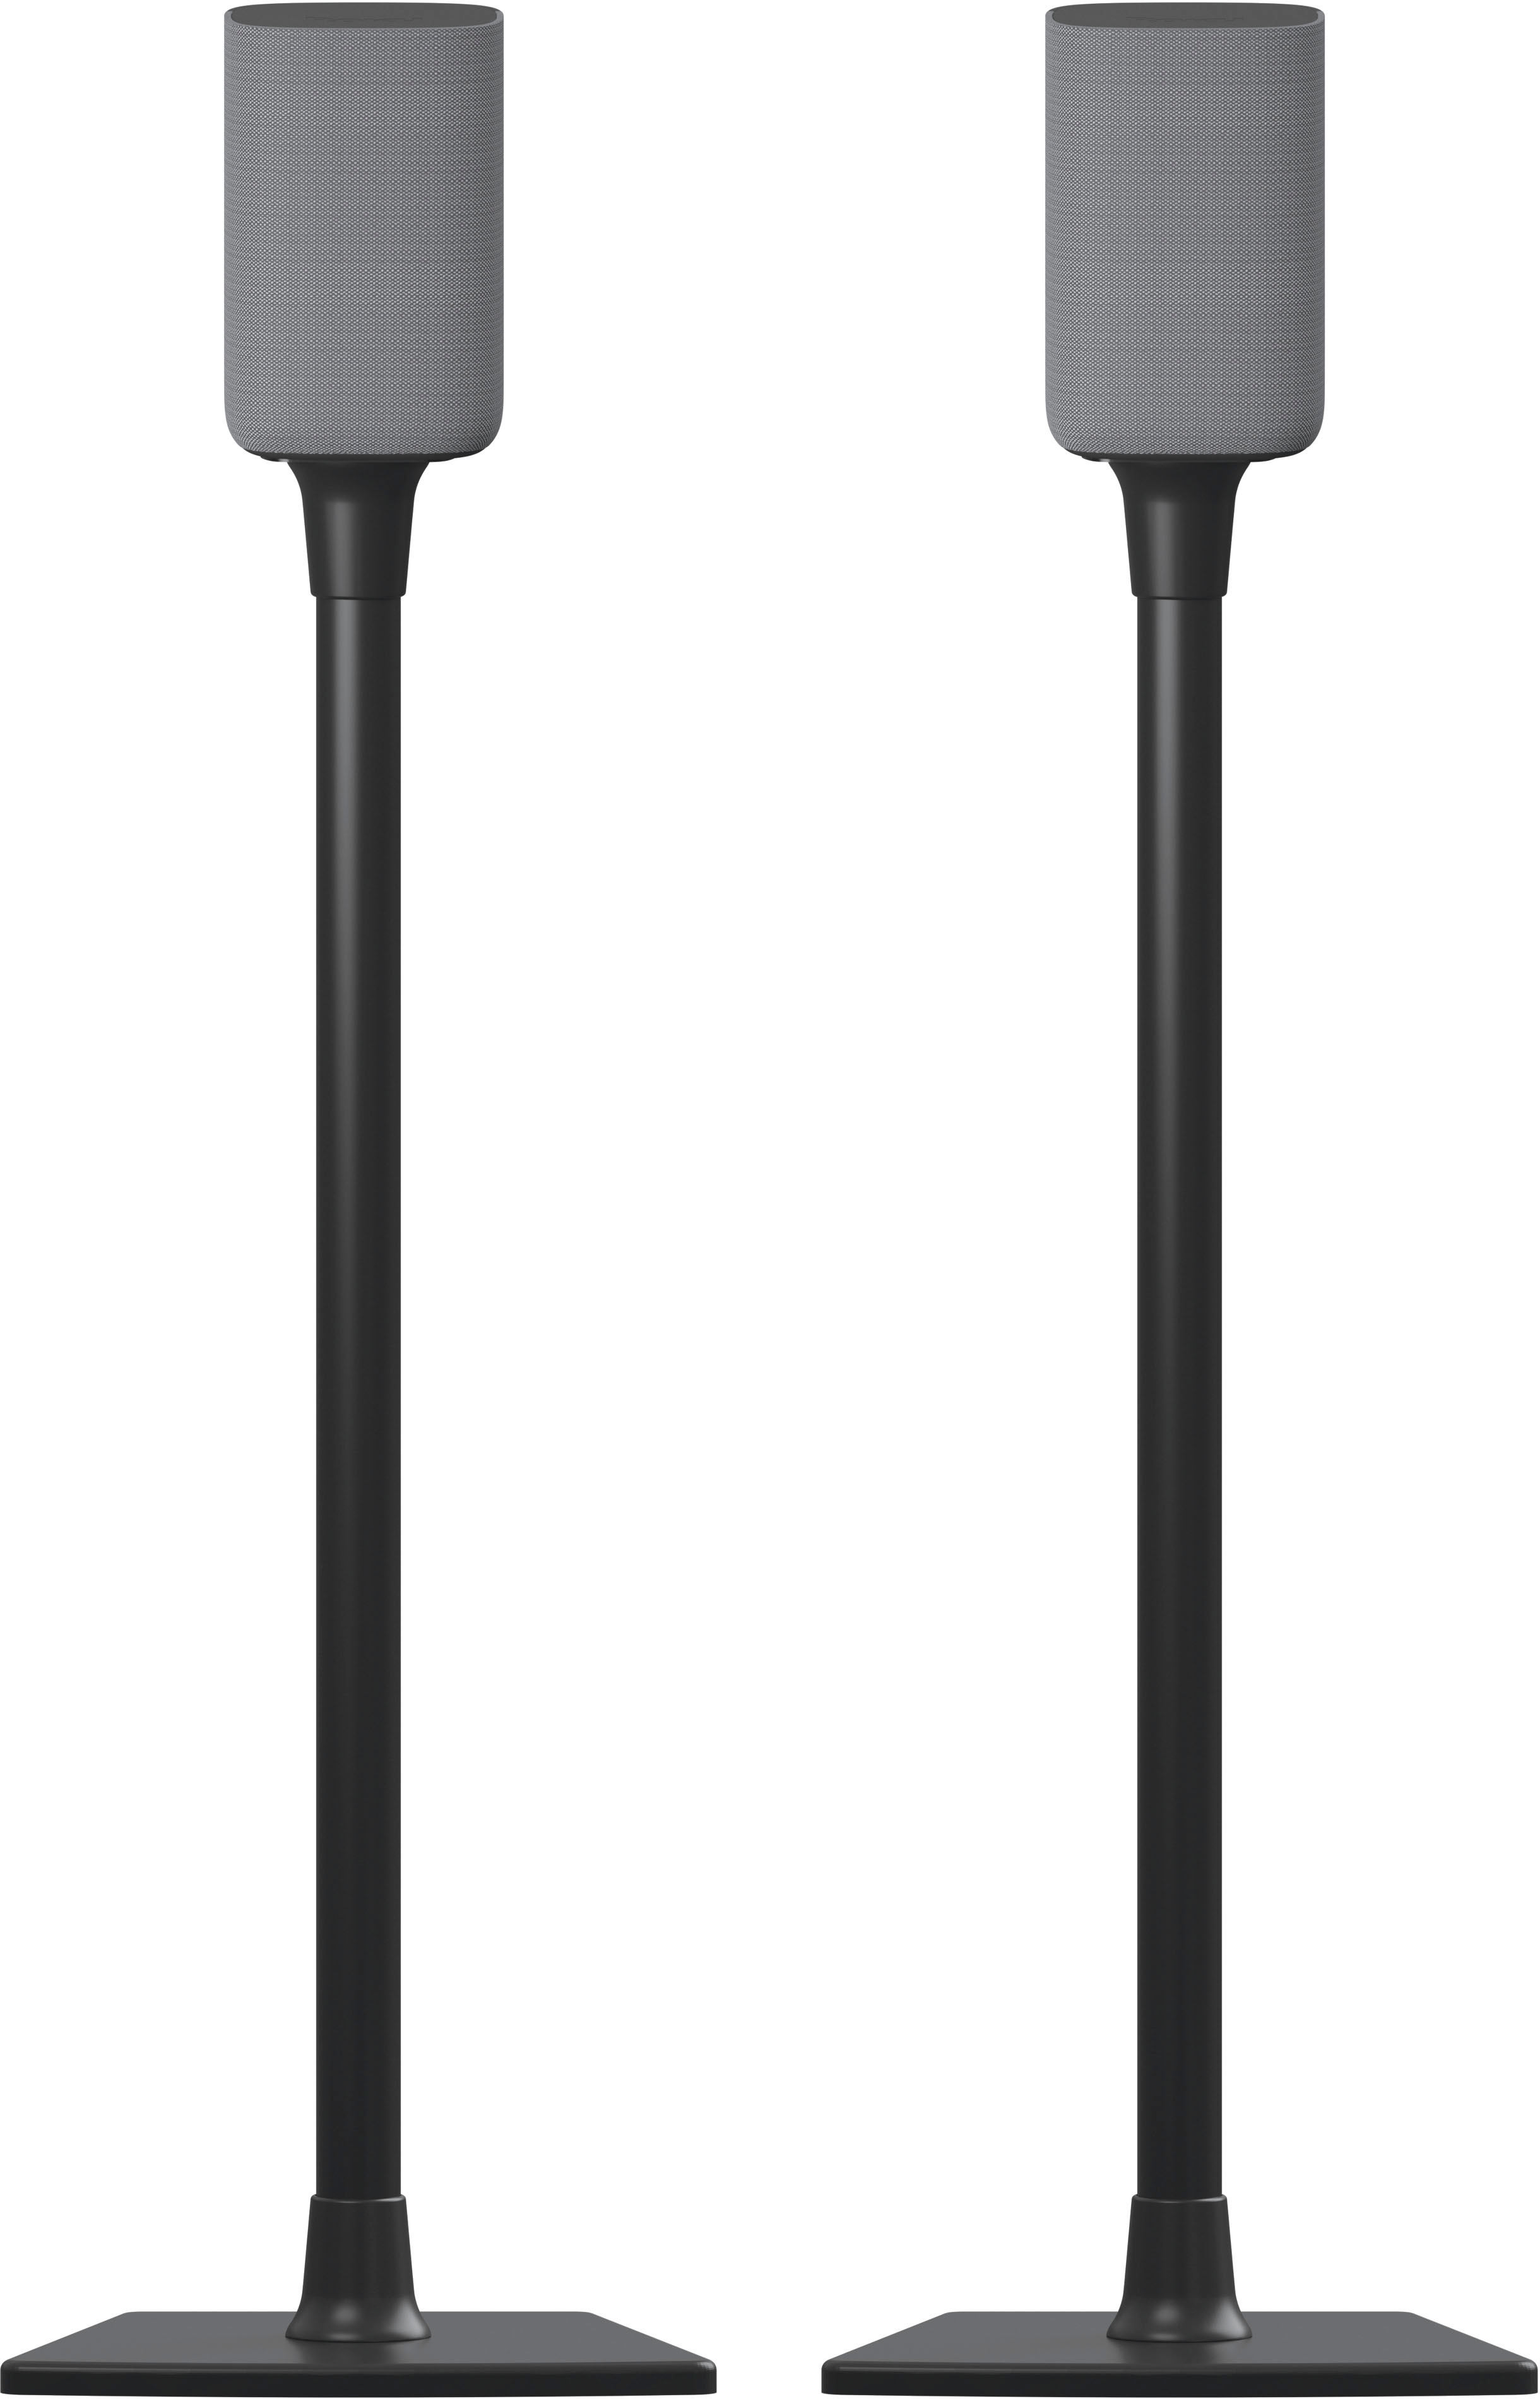 Angle View: Sanus - Universal Speaker Stands for Speakers up to 10 lbs  - Built in Cable Management - Sold in Pairs - Black